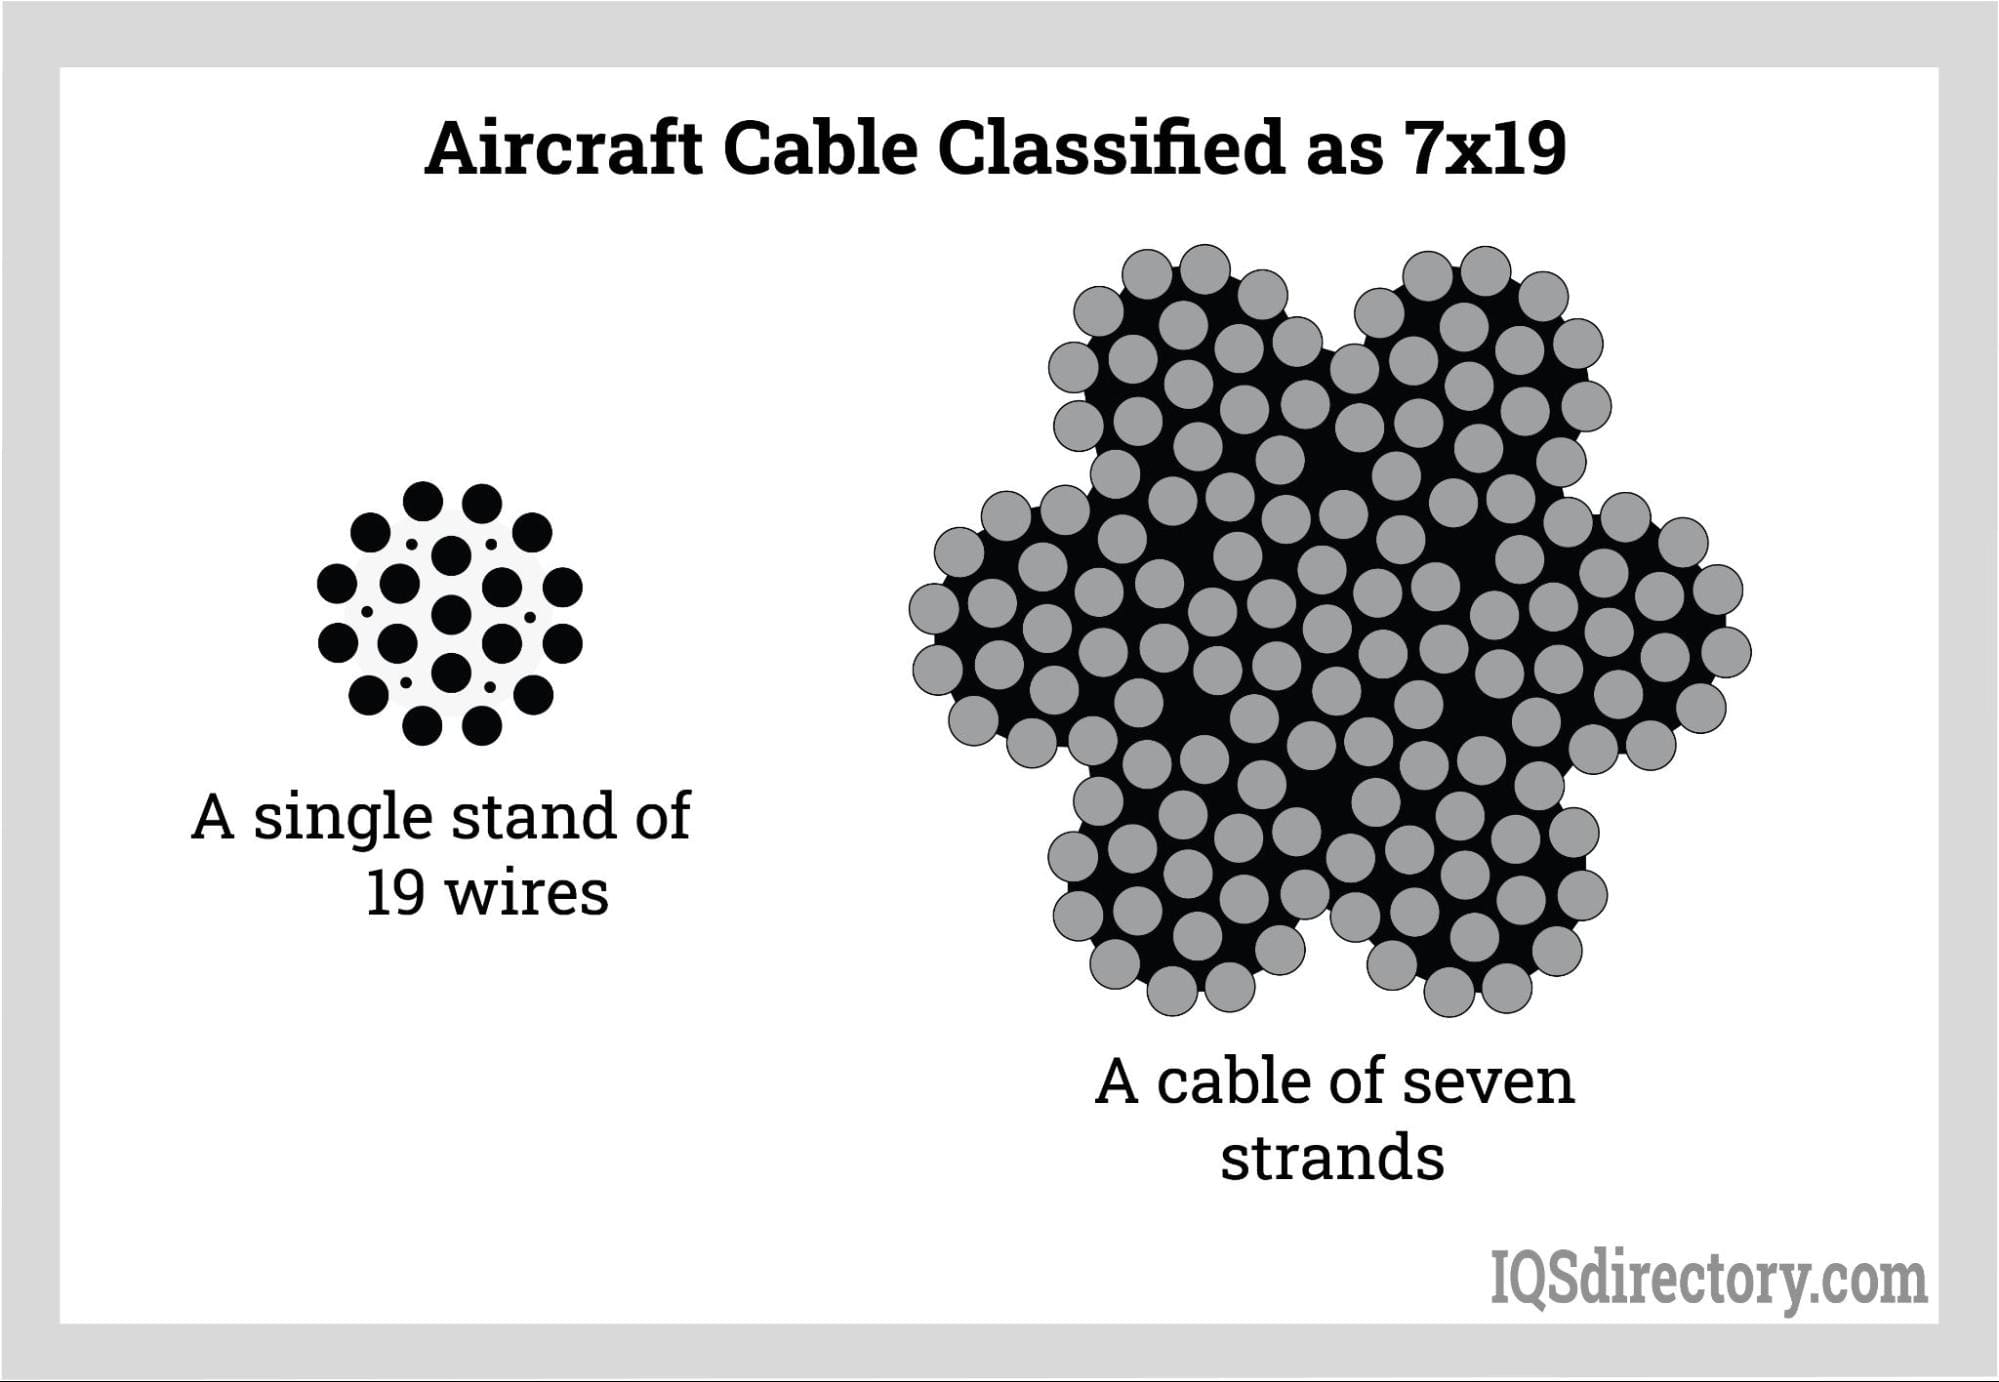 Aircraft Cable Classified as 7x19